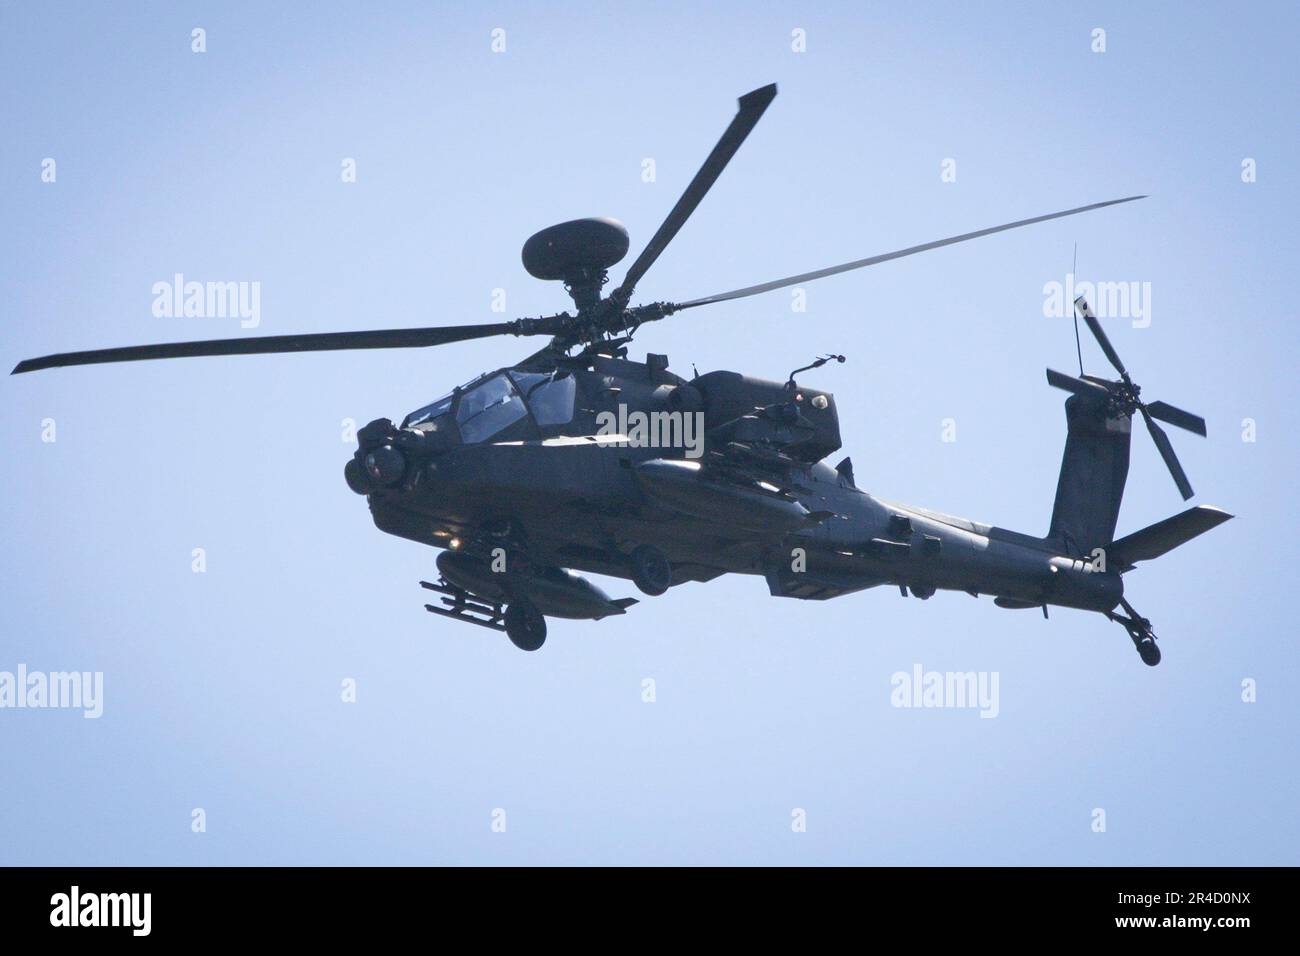 An Apache helicopter is seen flying over an army base in Tapa, Estonia on 20 May, 2023. Estonia is hosting the Spring Storm NATO exercises involving over 13 thousand personnel with US, German, British, French and Polish forces training together with the Estonian Defence Forces (eDF). (Photo by Jaap Arriens / Sipa USA) Stock Photo